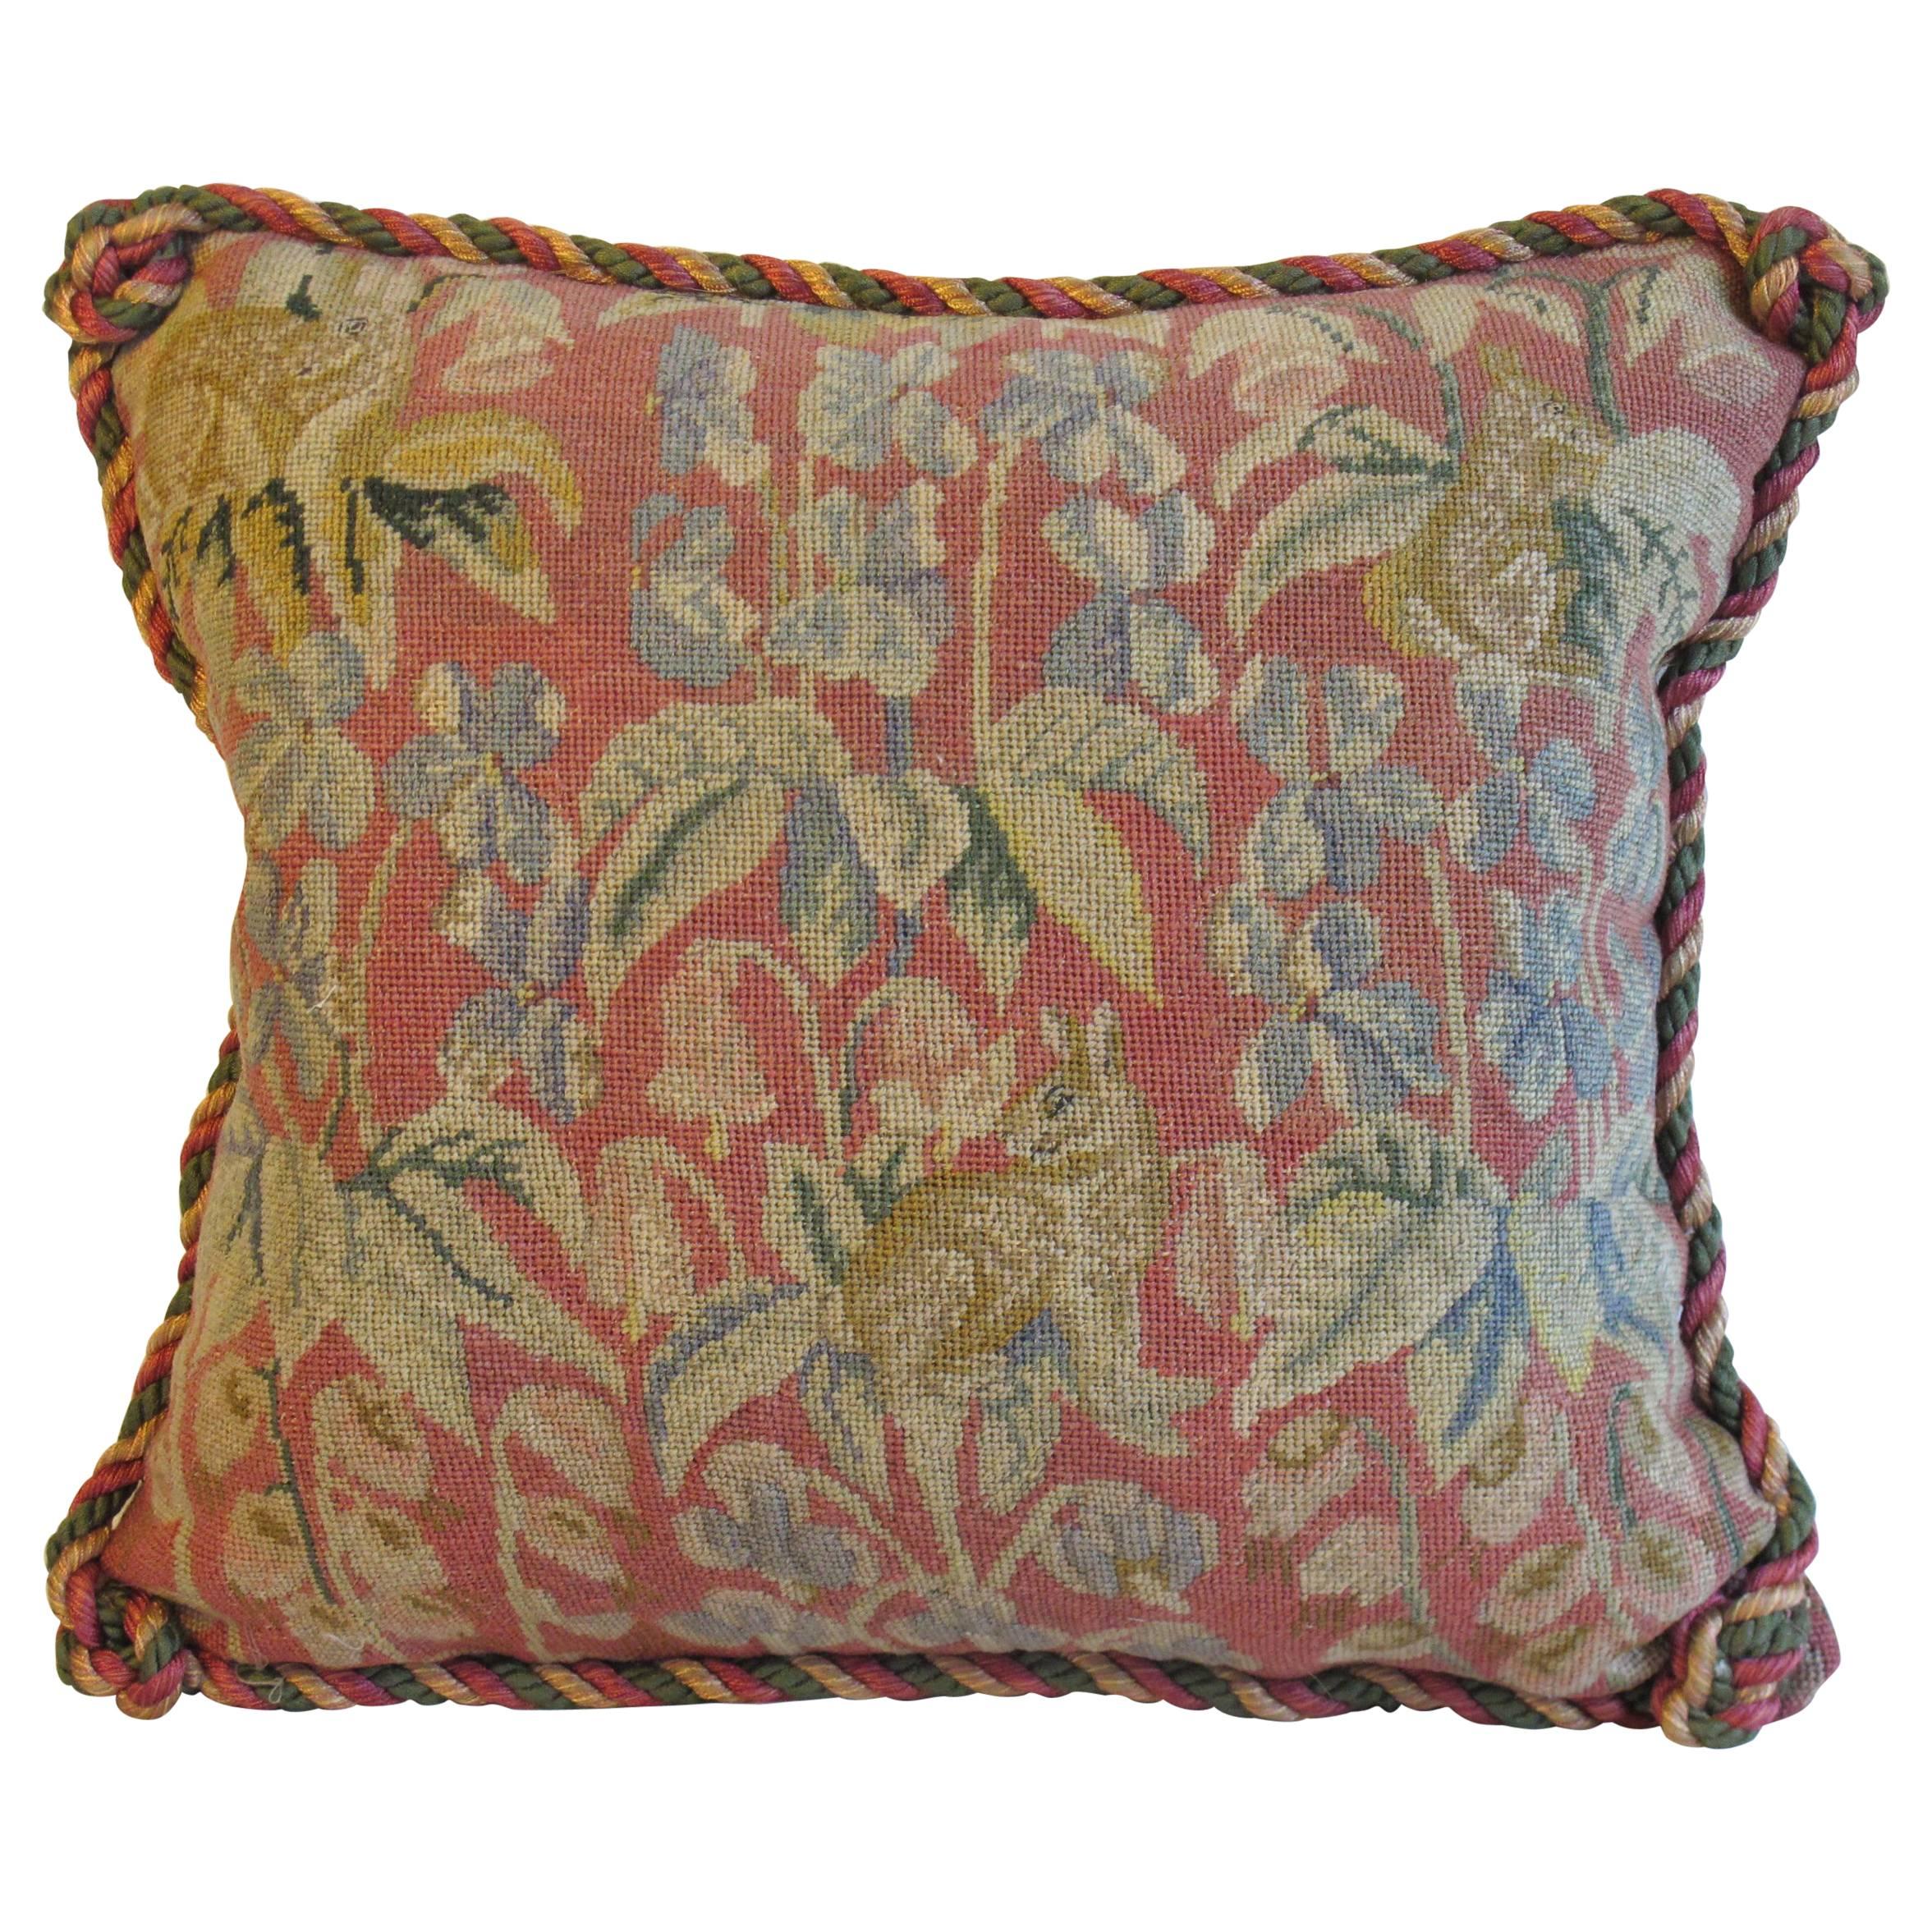 Vintage Needlepoint Pillow by Mary Jane McCarty